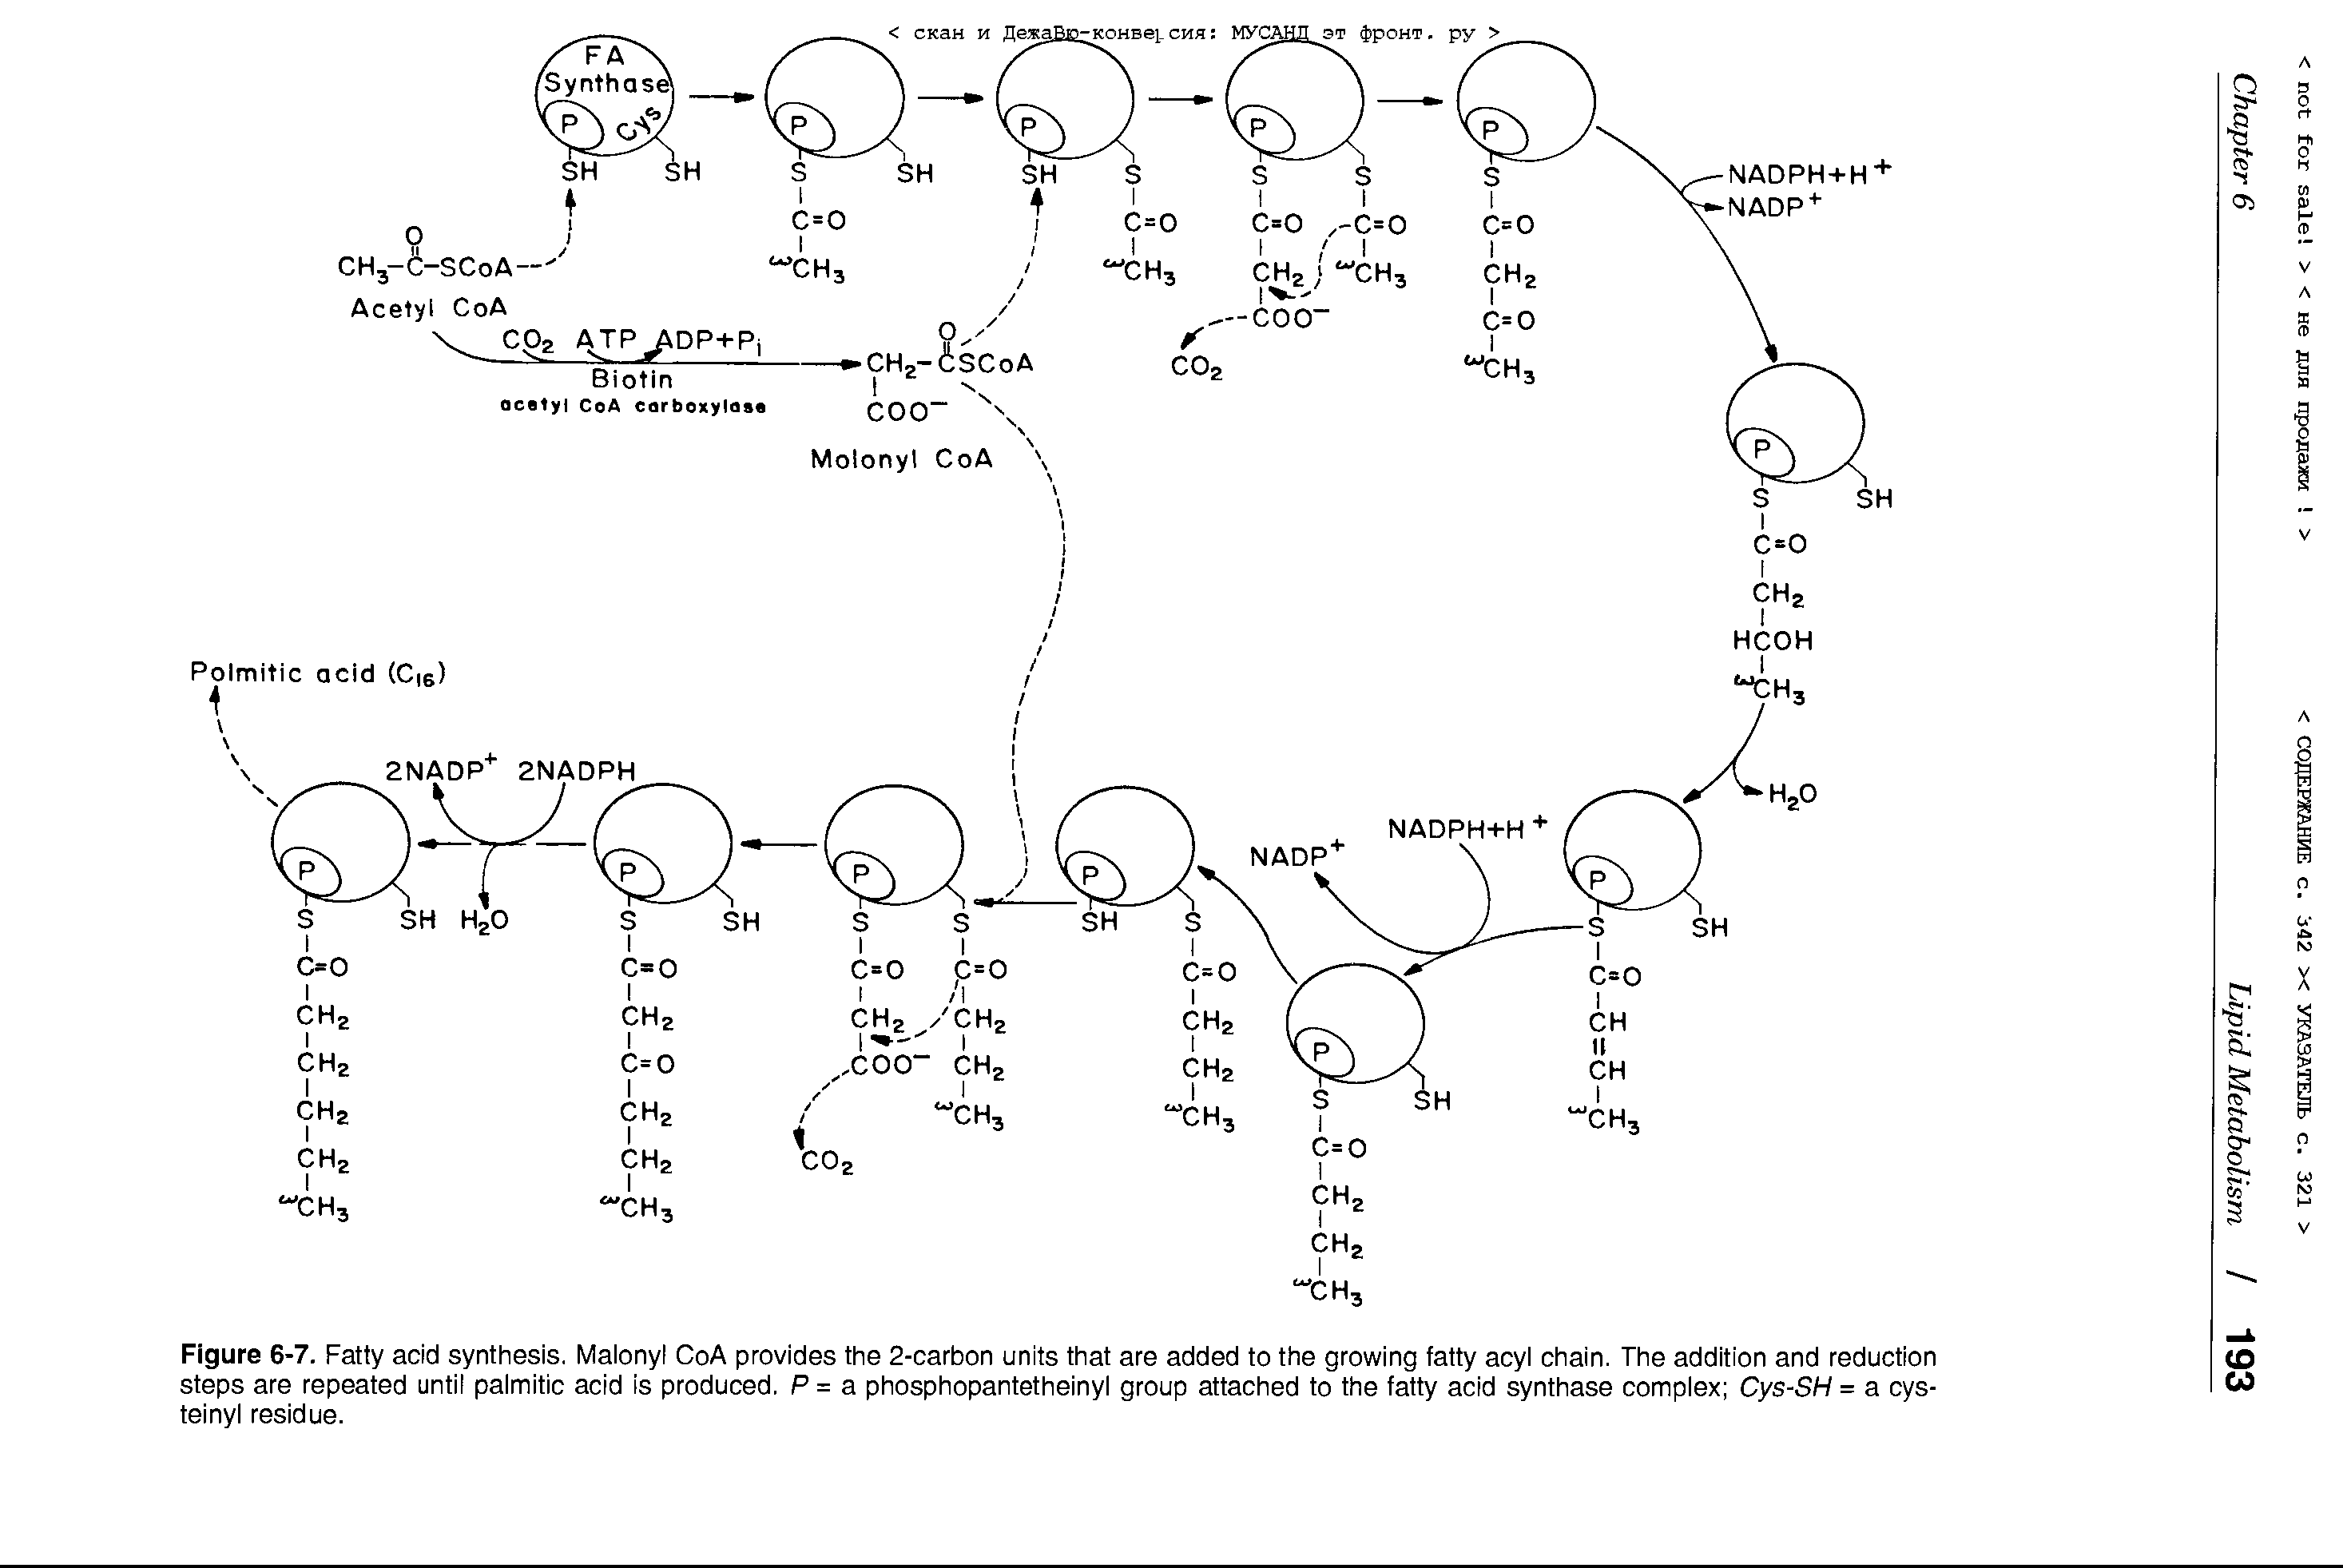 Figure 6-7. Fatty acid synthesis. Malonyl CoA provides the 2-carbon units that are added to the growing fatty acyl chain. The addition and reduction steps are repeated until palmitic acid is produced. P = a phosphopantetheinyl group attached to the fatty acid synthase complex Cys-SH = a cys-teinyl residue.